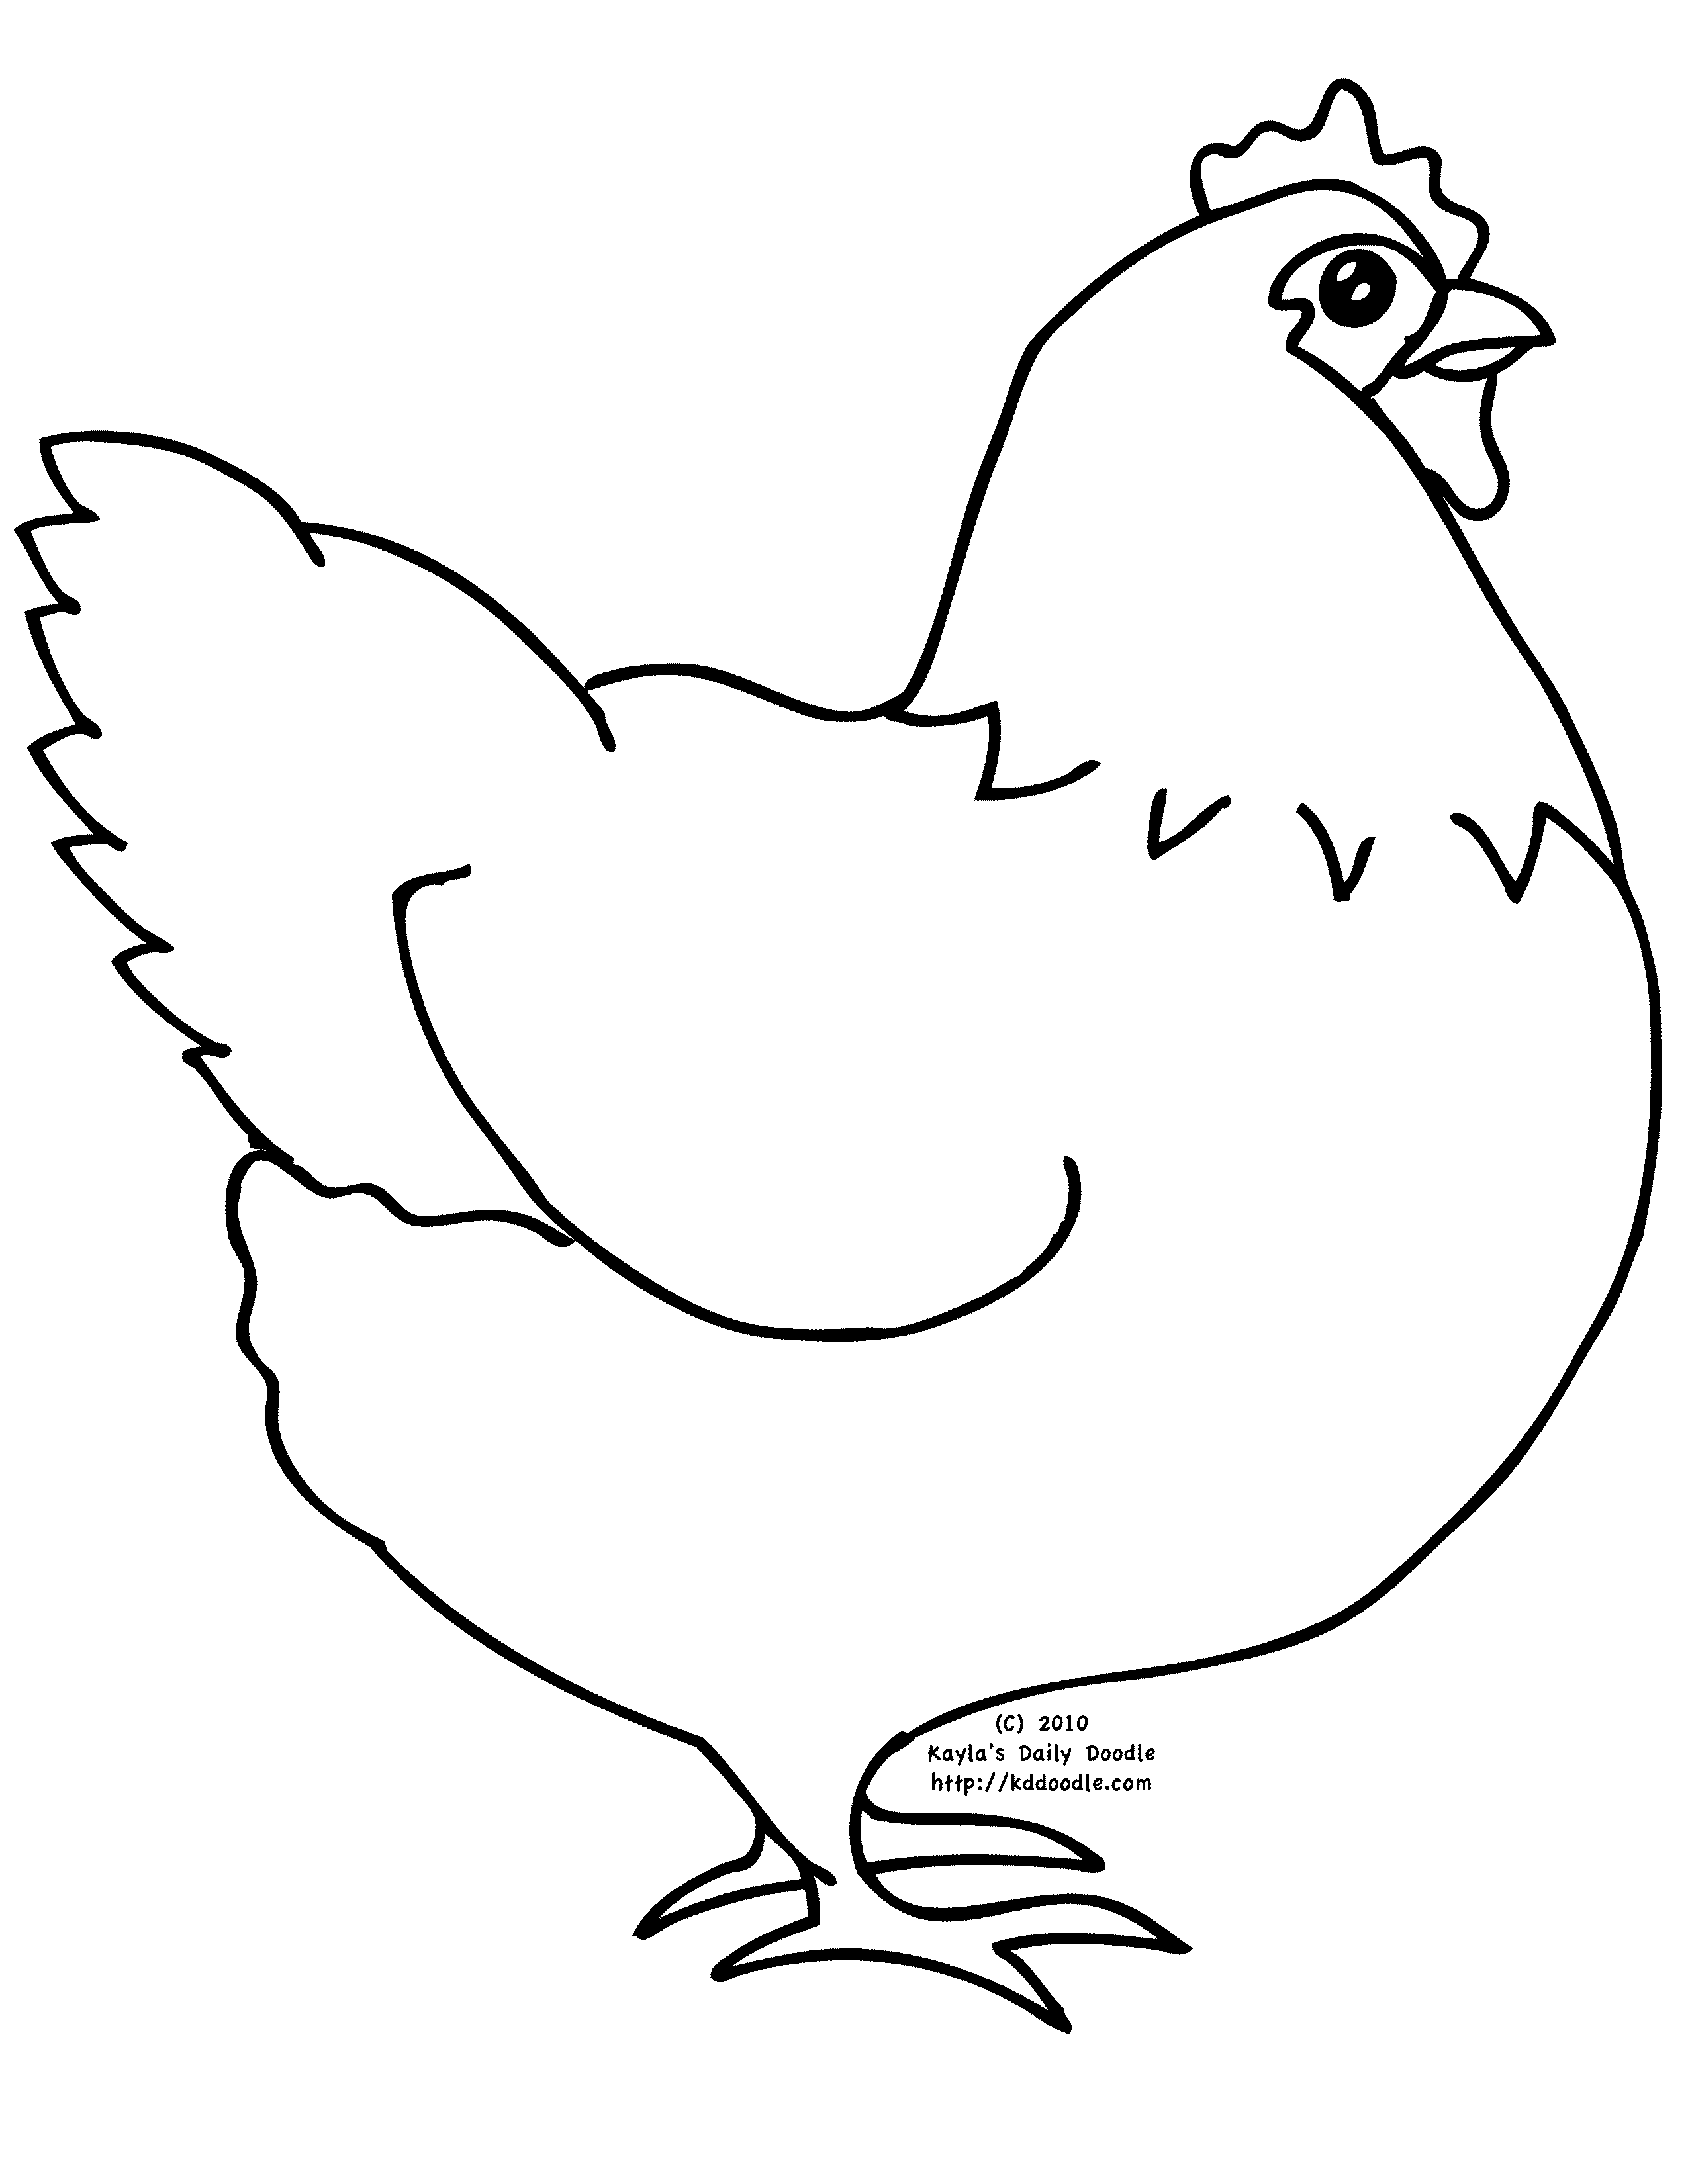 hen clipart drawing